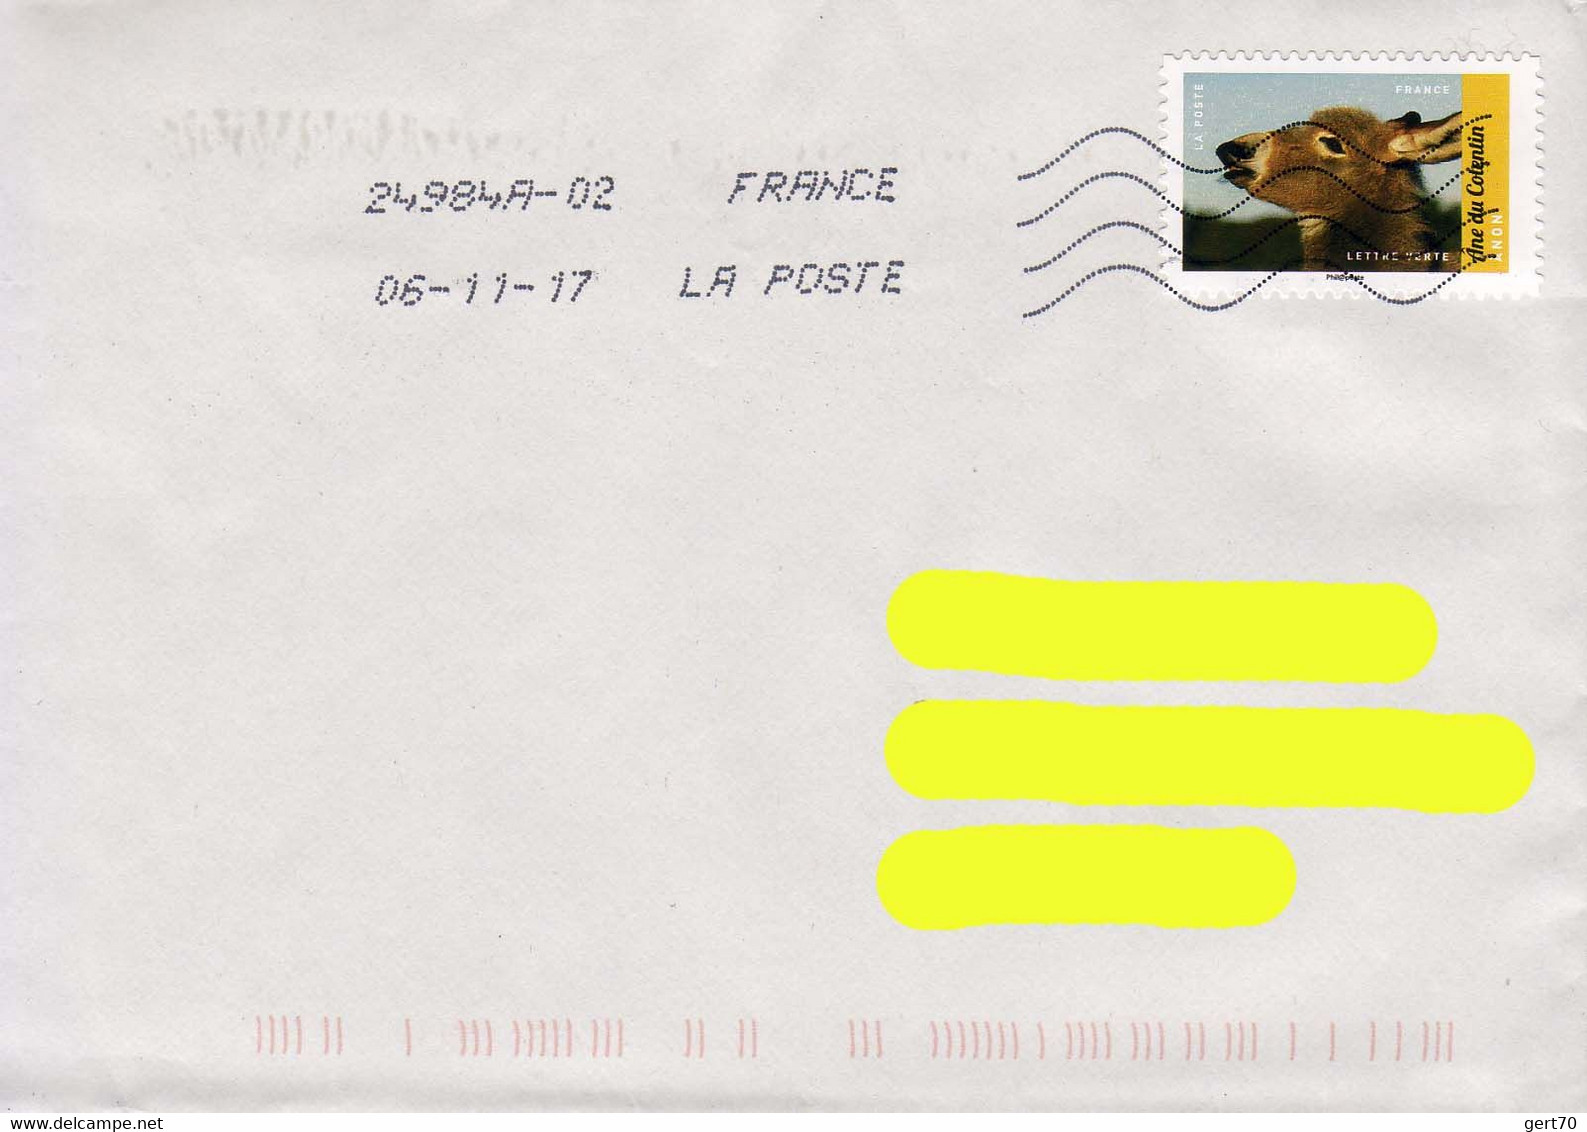 France 2017, Donkey / Ane Du Cotentin On A Circulated Cover. - Burros Y Asnos